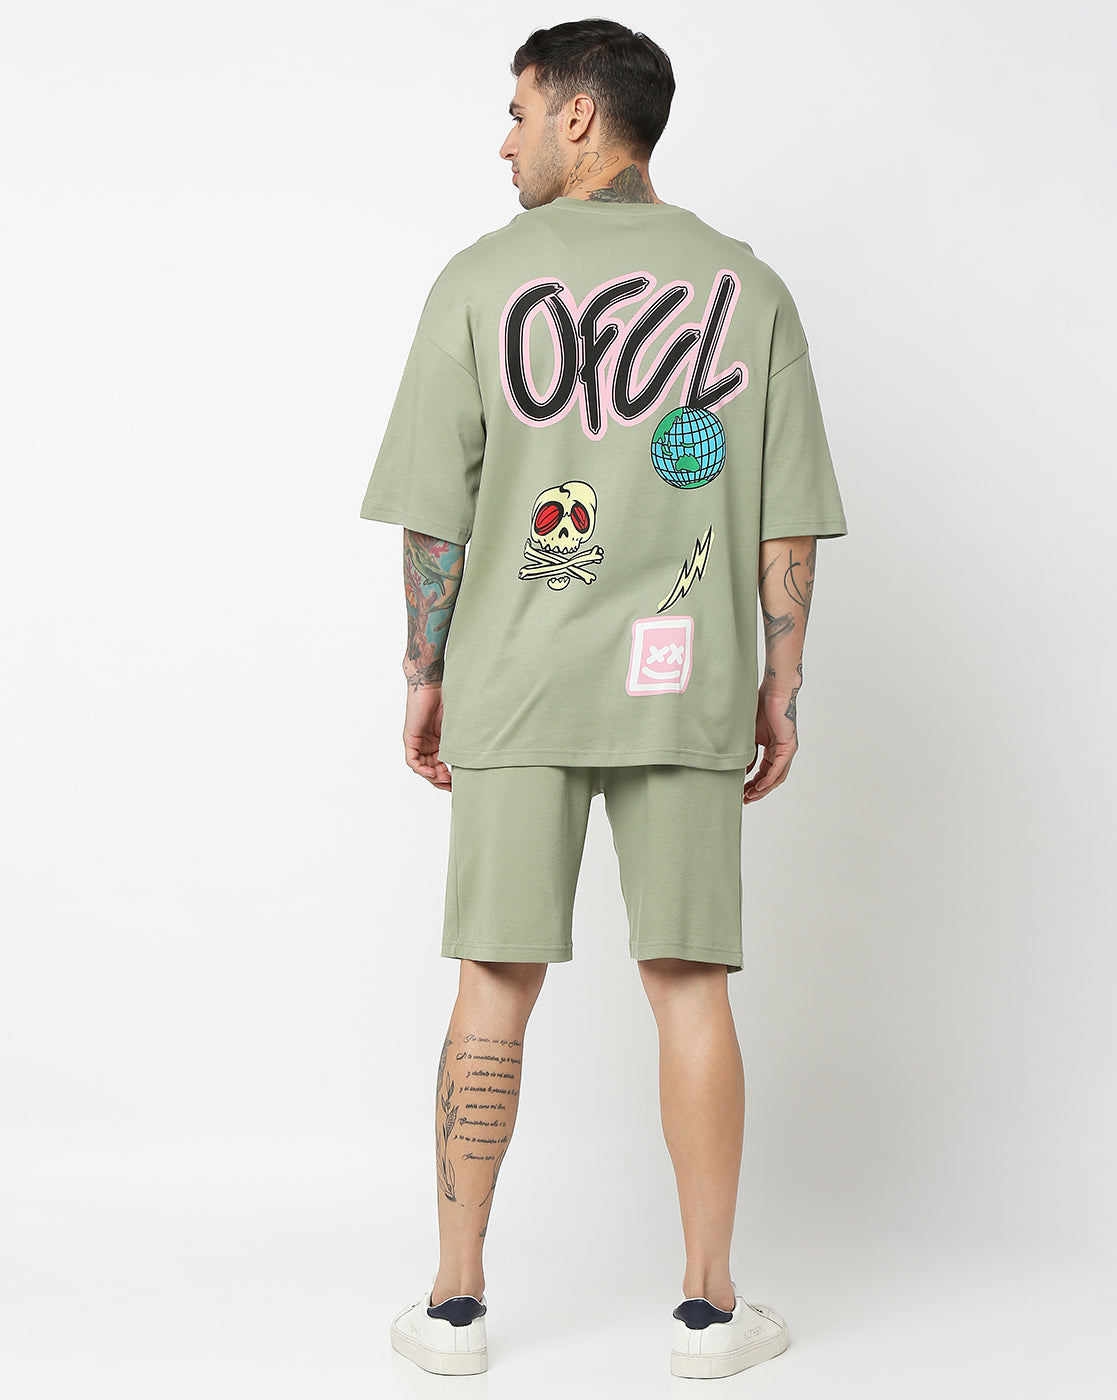 Mint Green OFCL Graphic Printed Oversized Co-ords